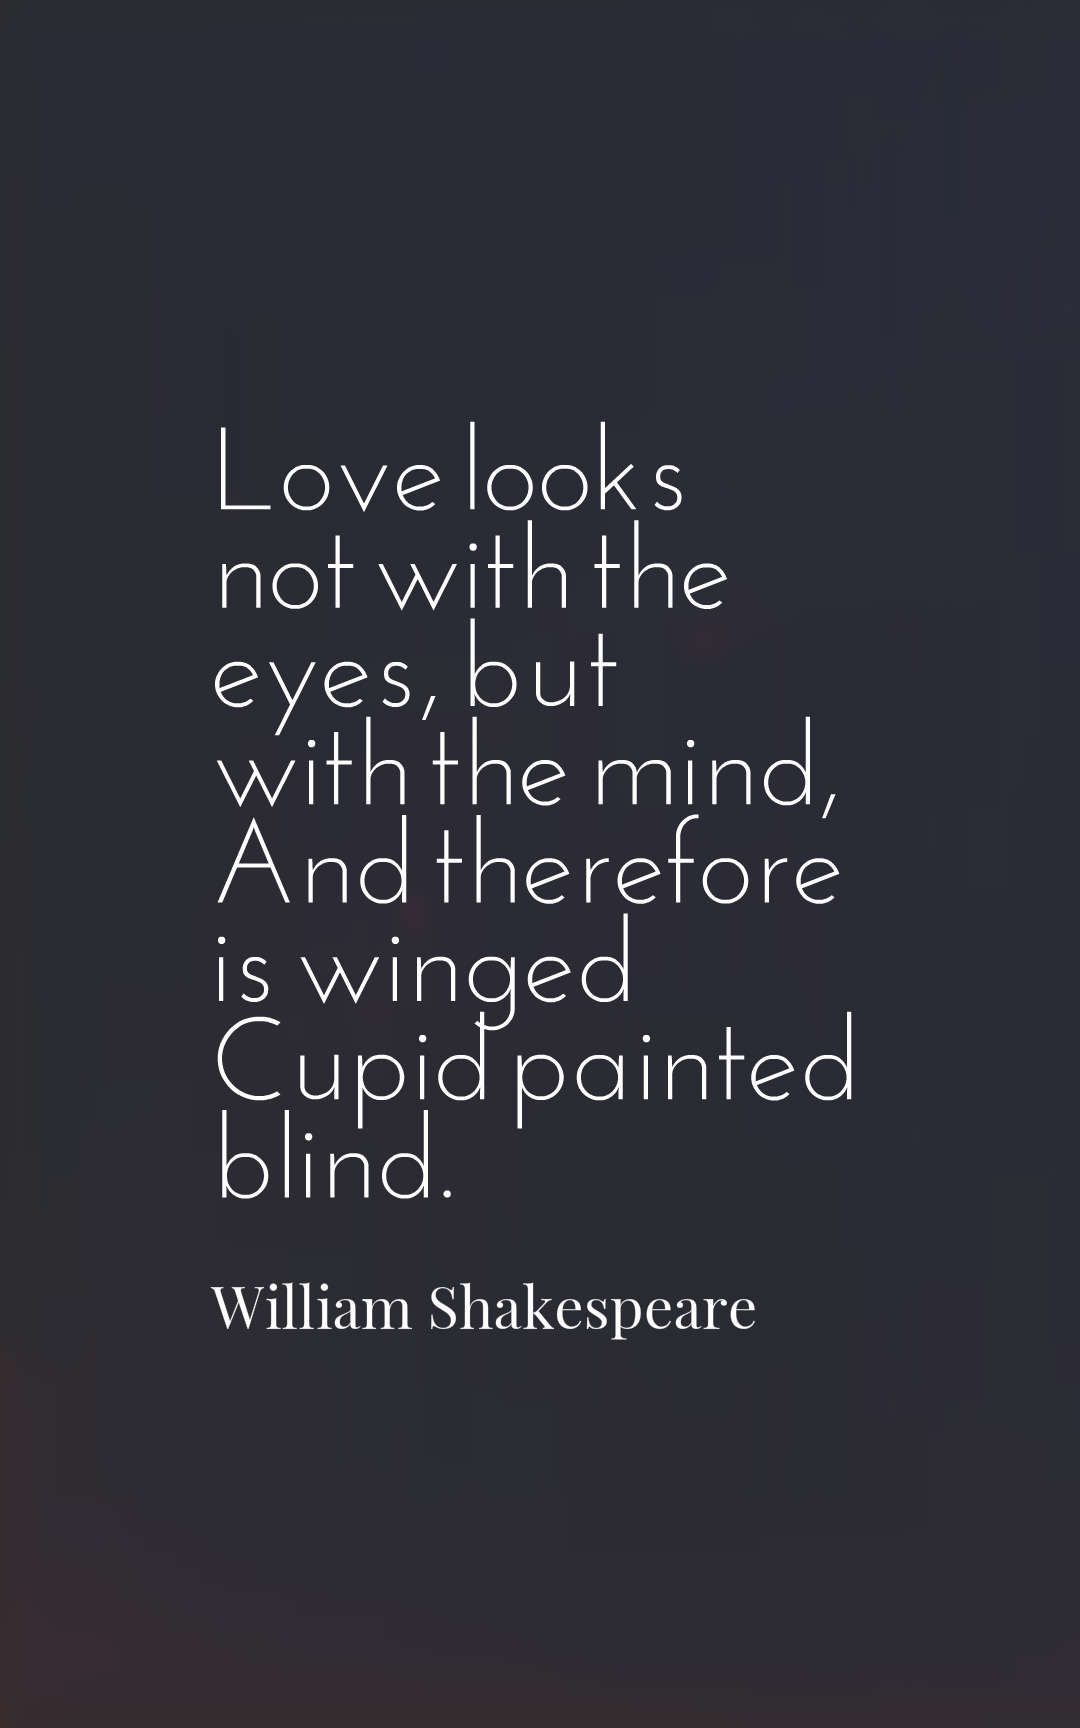 Love looks not with the eyes, but with the mind, And therefore is winged Cupid painted blind.